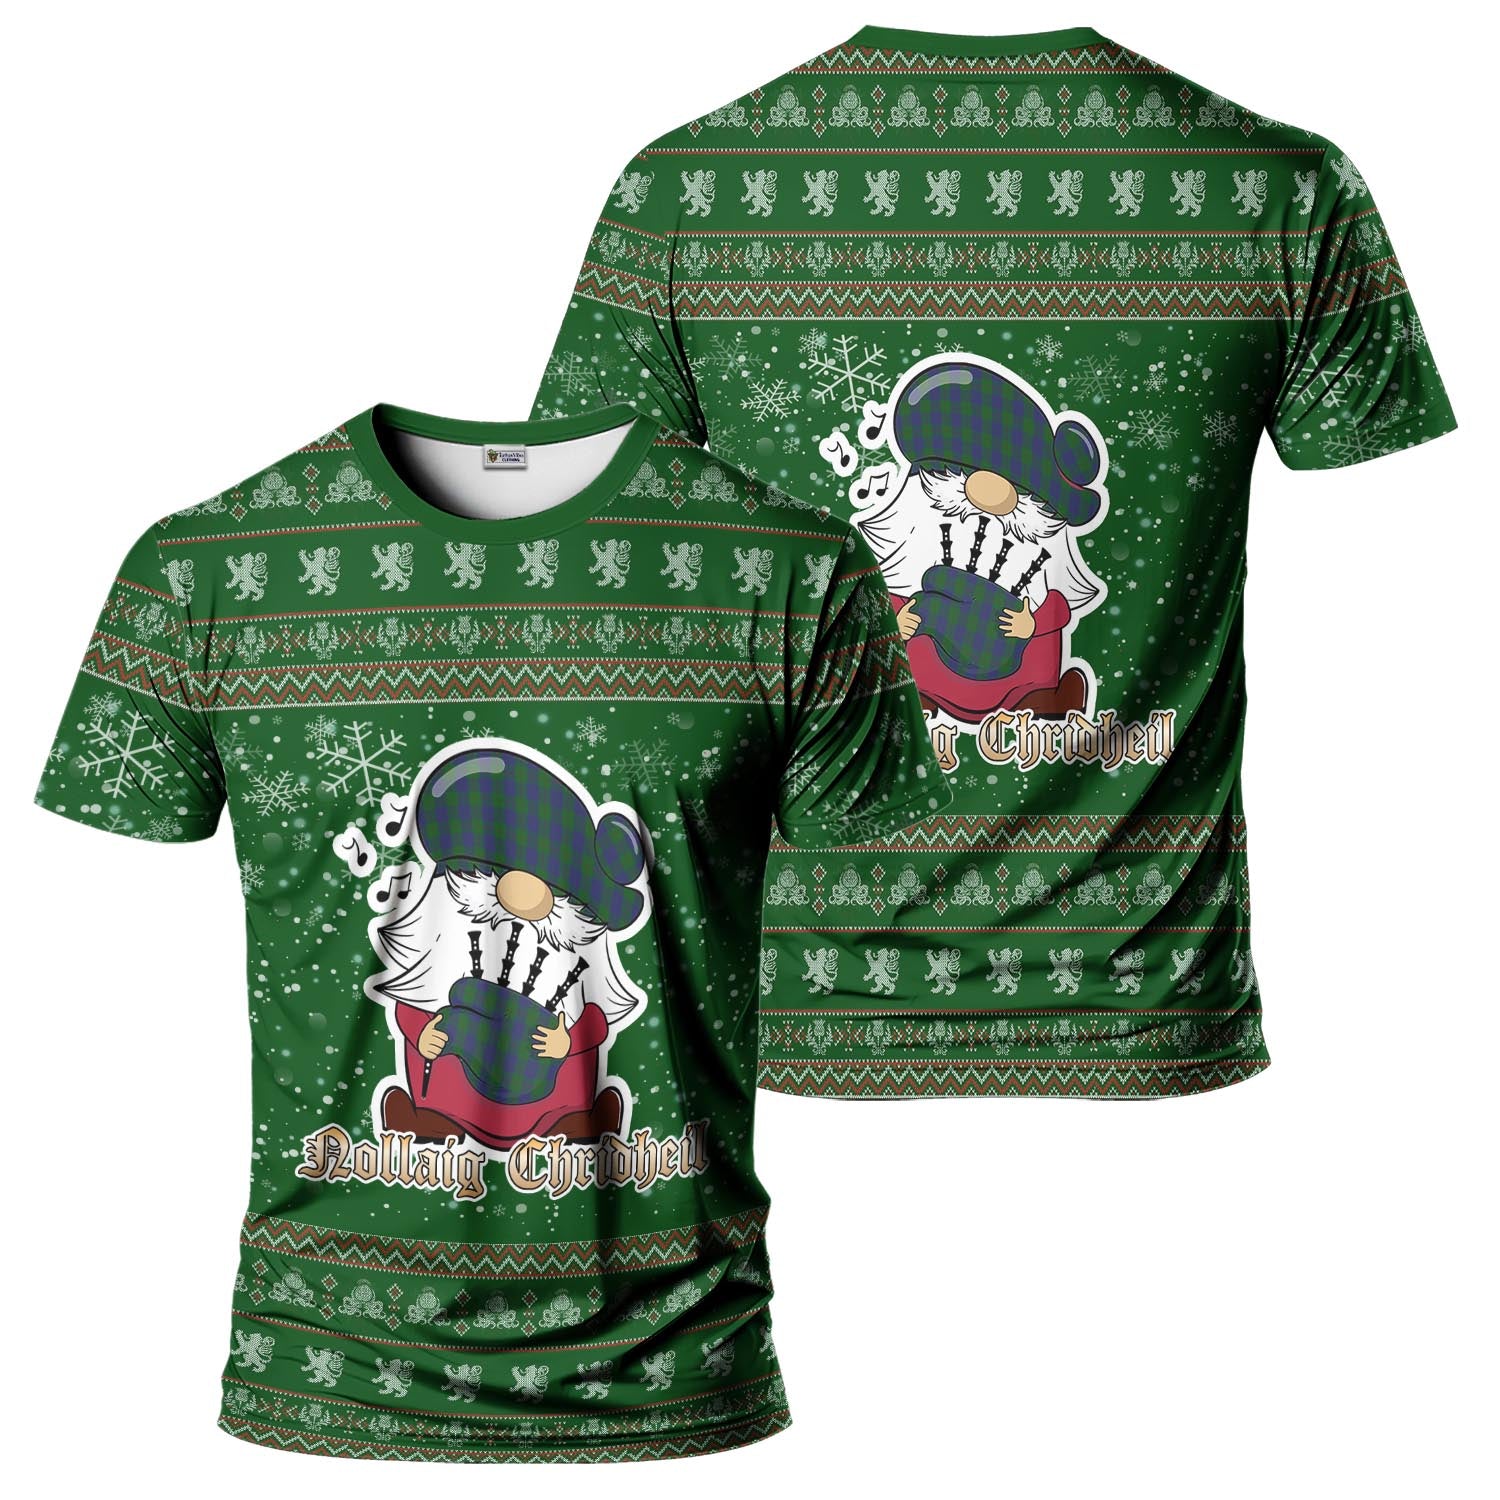 Barclay Clan Christmas Family T-Shirt with Funny Gnome Playing Bagpipes Men's Shirt Green - Tartanvibesclothing